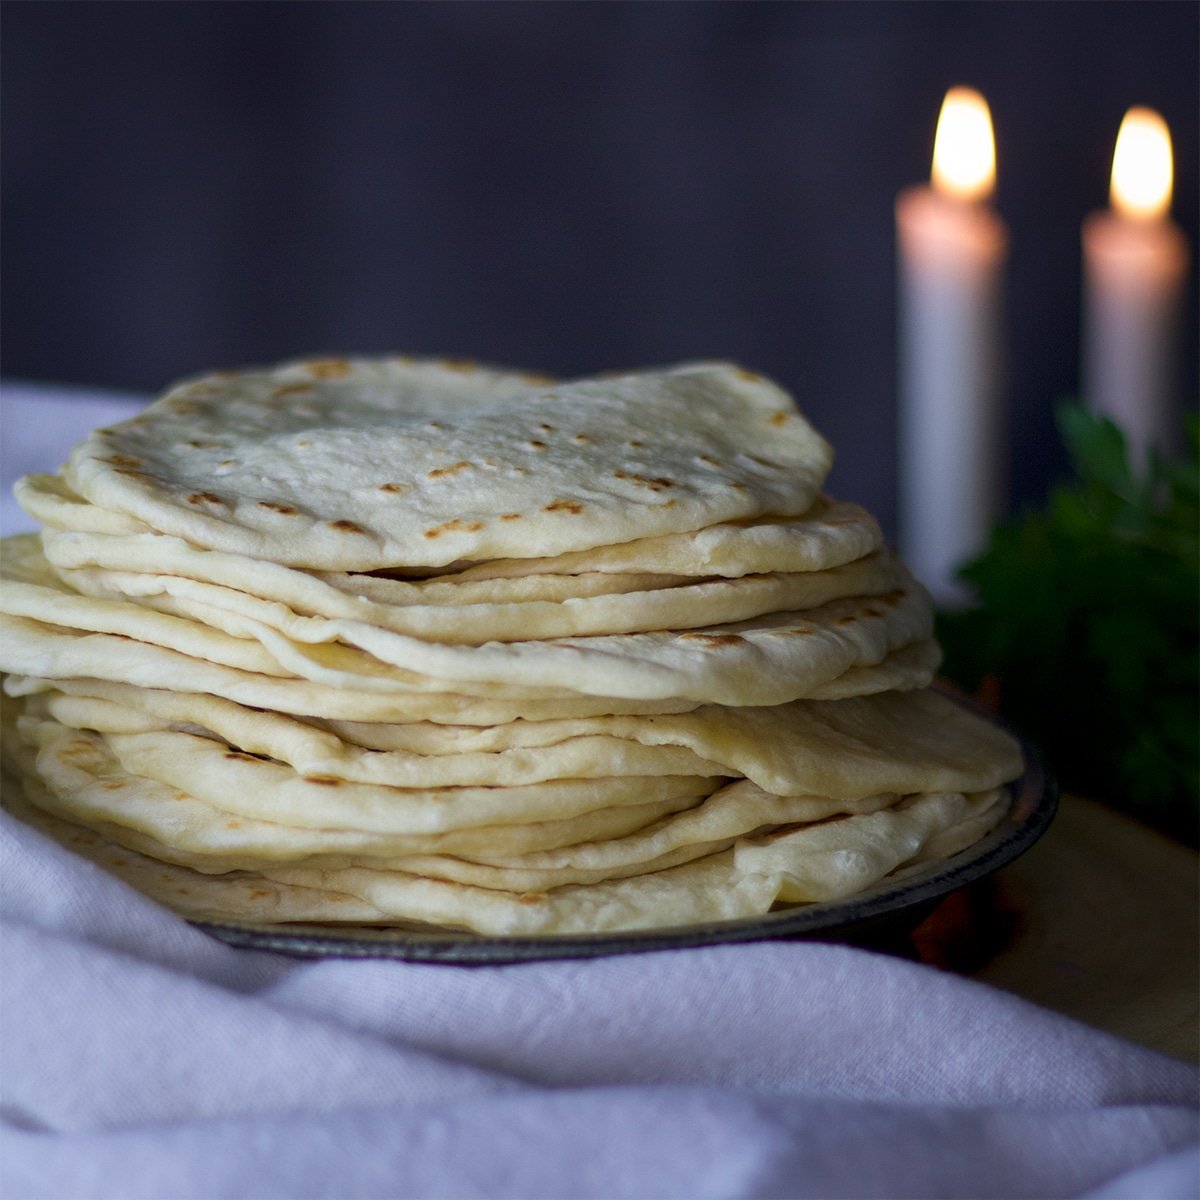 A tall stack of homemade flour tortillas on a table with lit candles behind them.